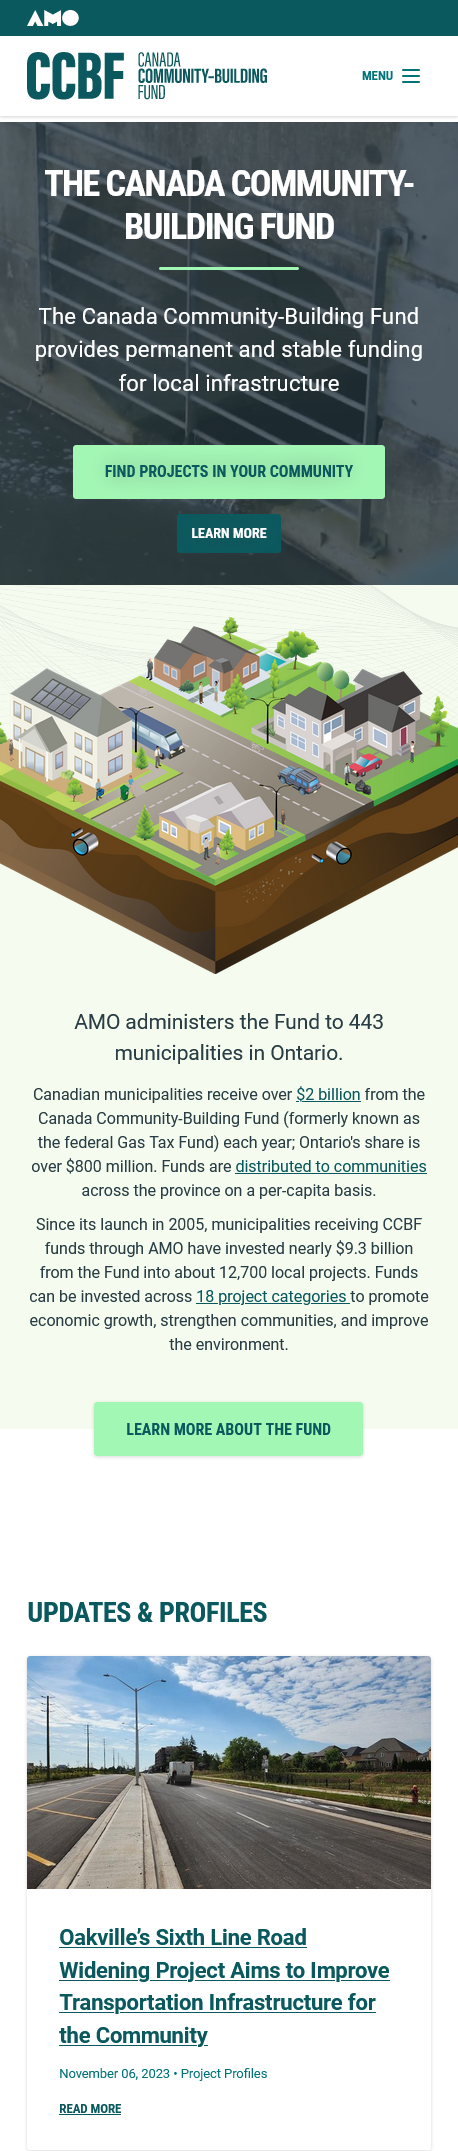 A screenshot of the Canada Community-Building Fund website on a small screen.